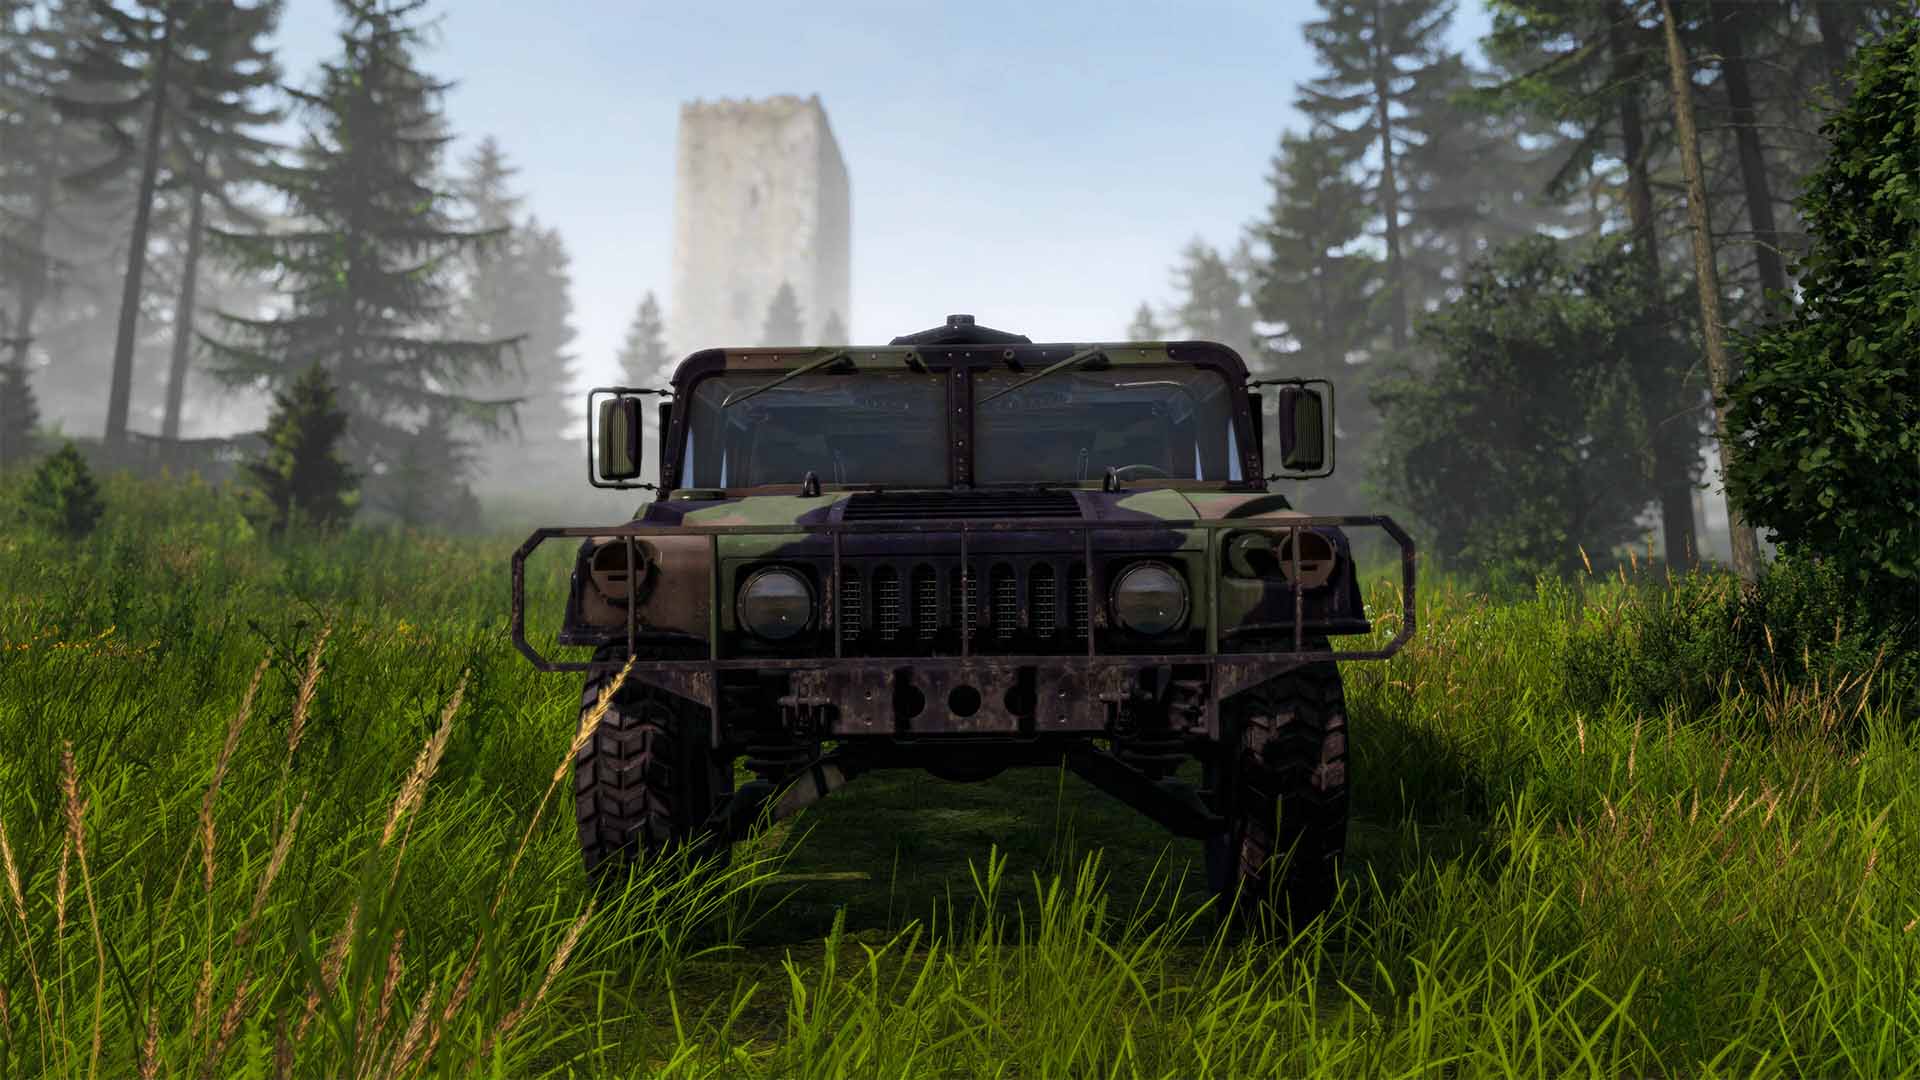 DayZ is getting its biggest update of 2022